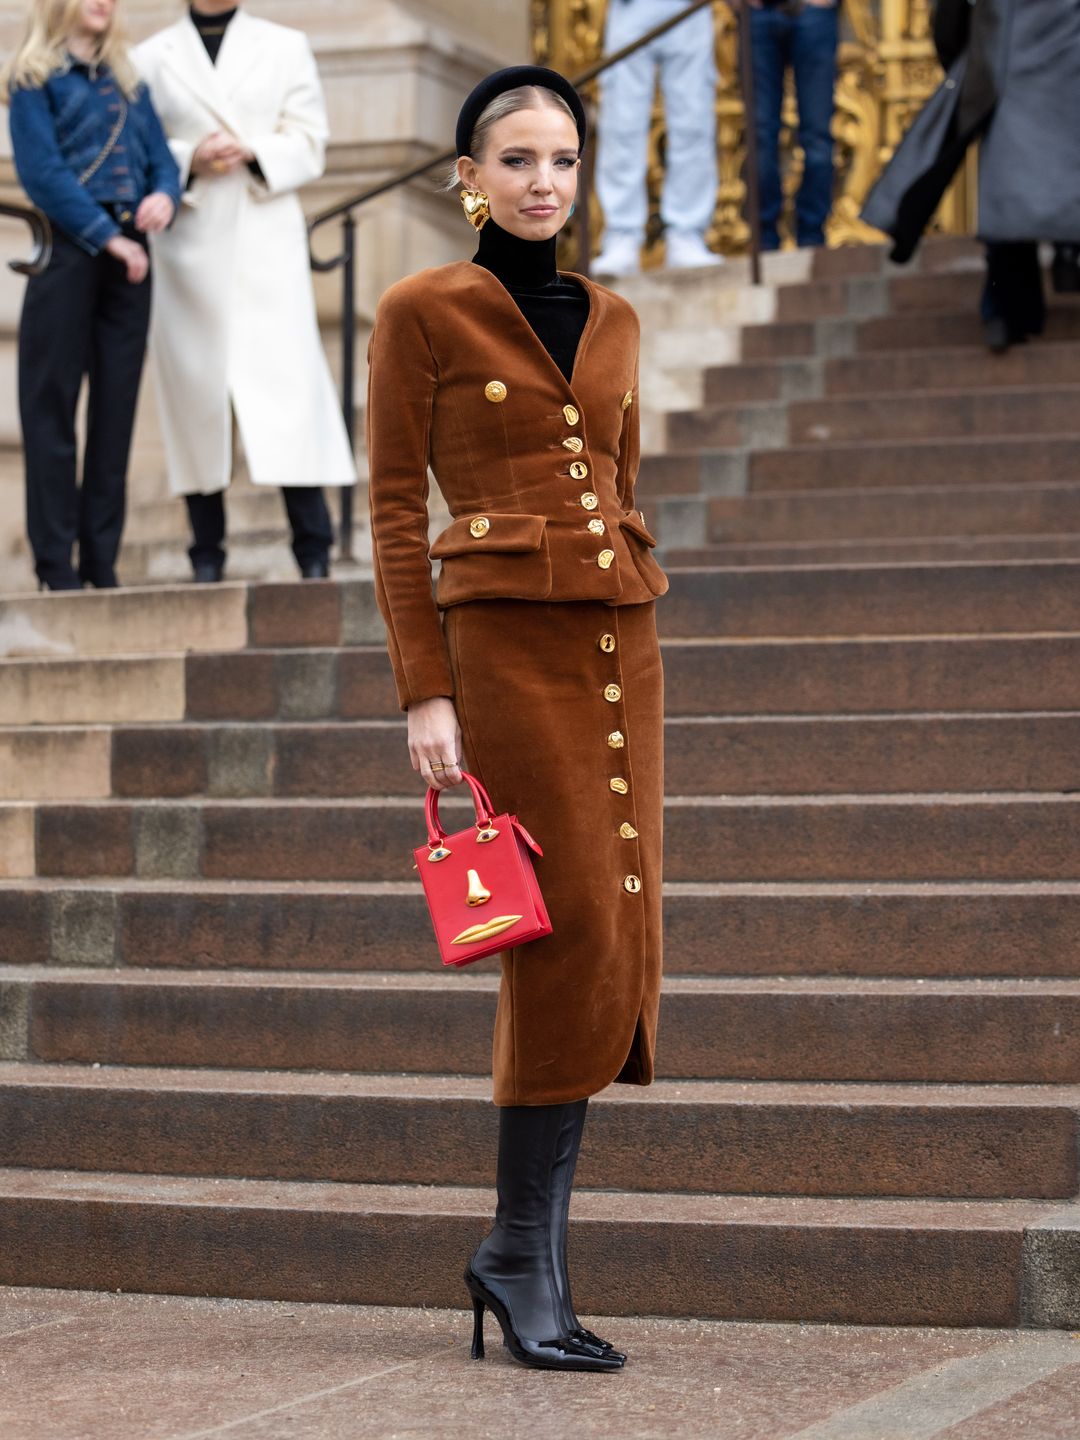 Leonie Hanne attends the Schiaparelli Haute Couture Spring/Summer 2024 show wearing a brown twin piece and red handbag